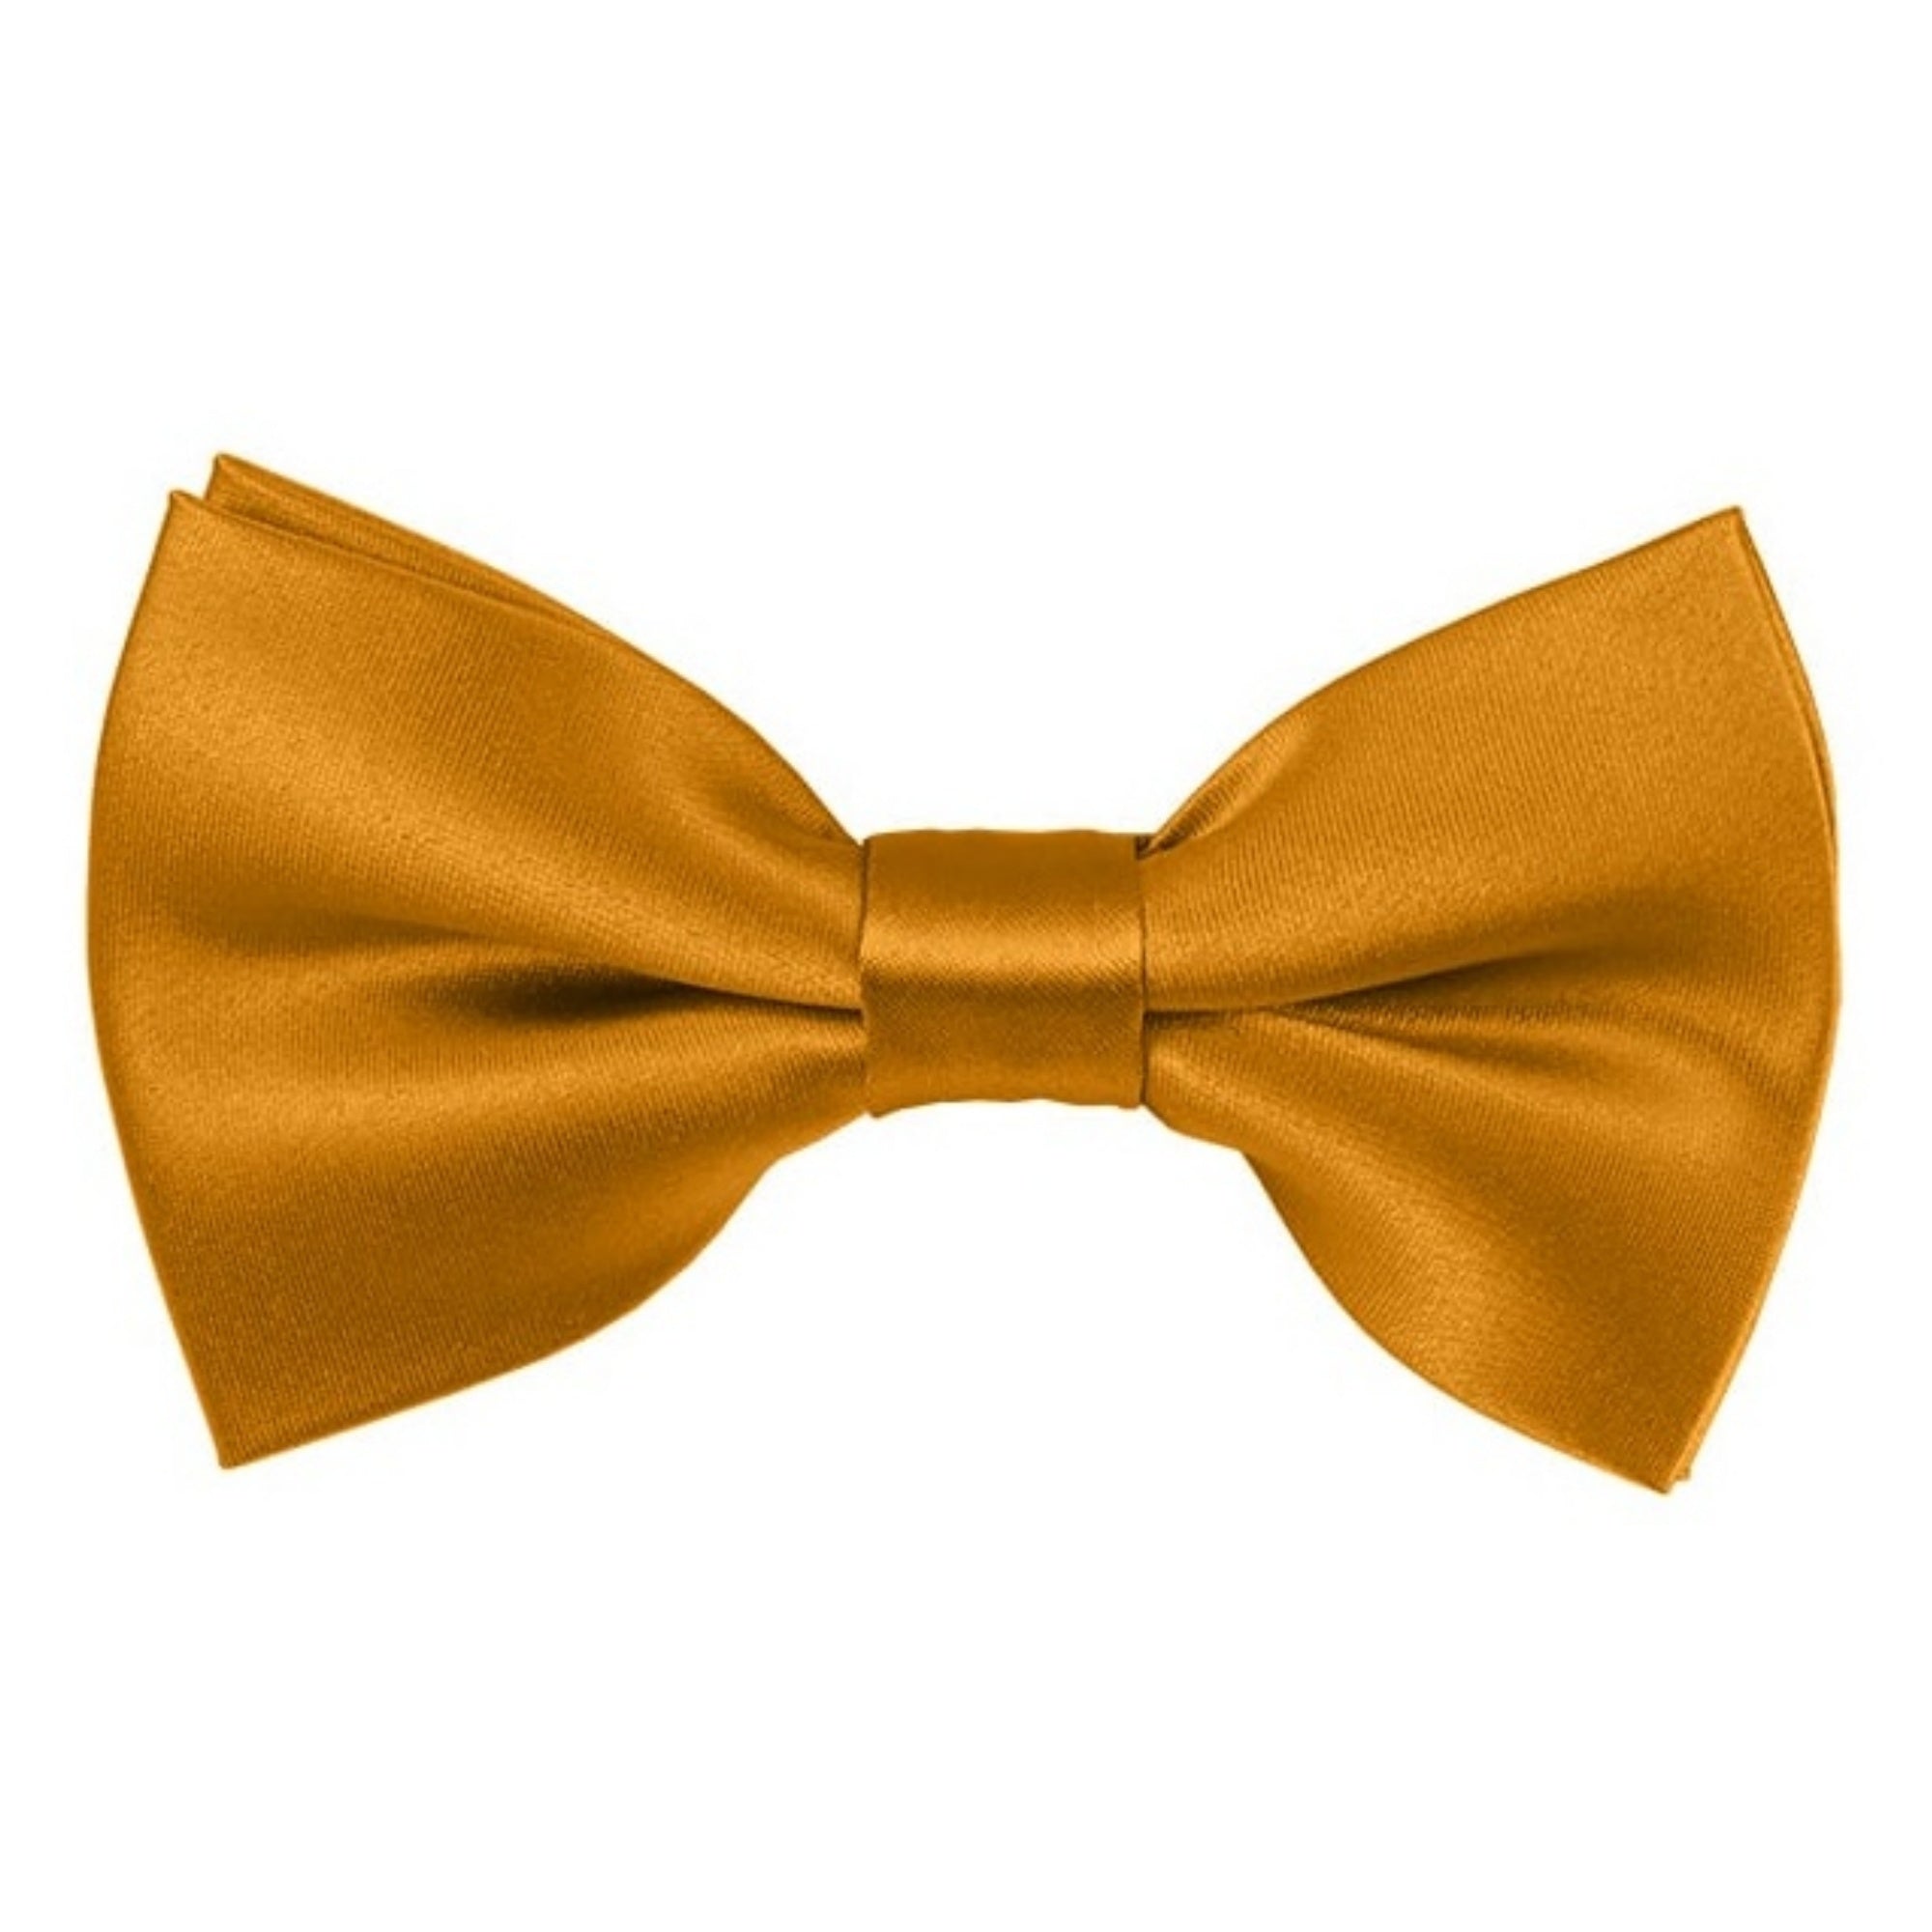 TheDapperTie Men's Solid Color 2.5 W And 4.5 L Inch Pre-Tied adjustable Bow Ties Men's Solid Color Bow Tie TheDapperTie Goldbar  